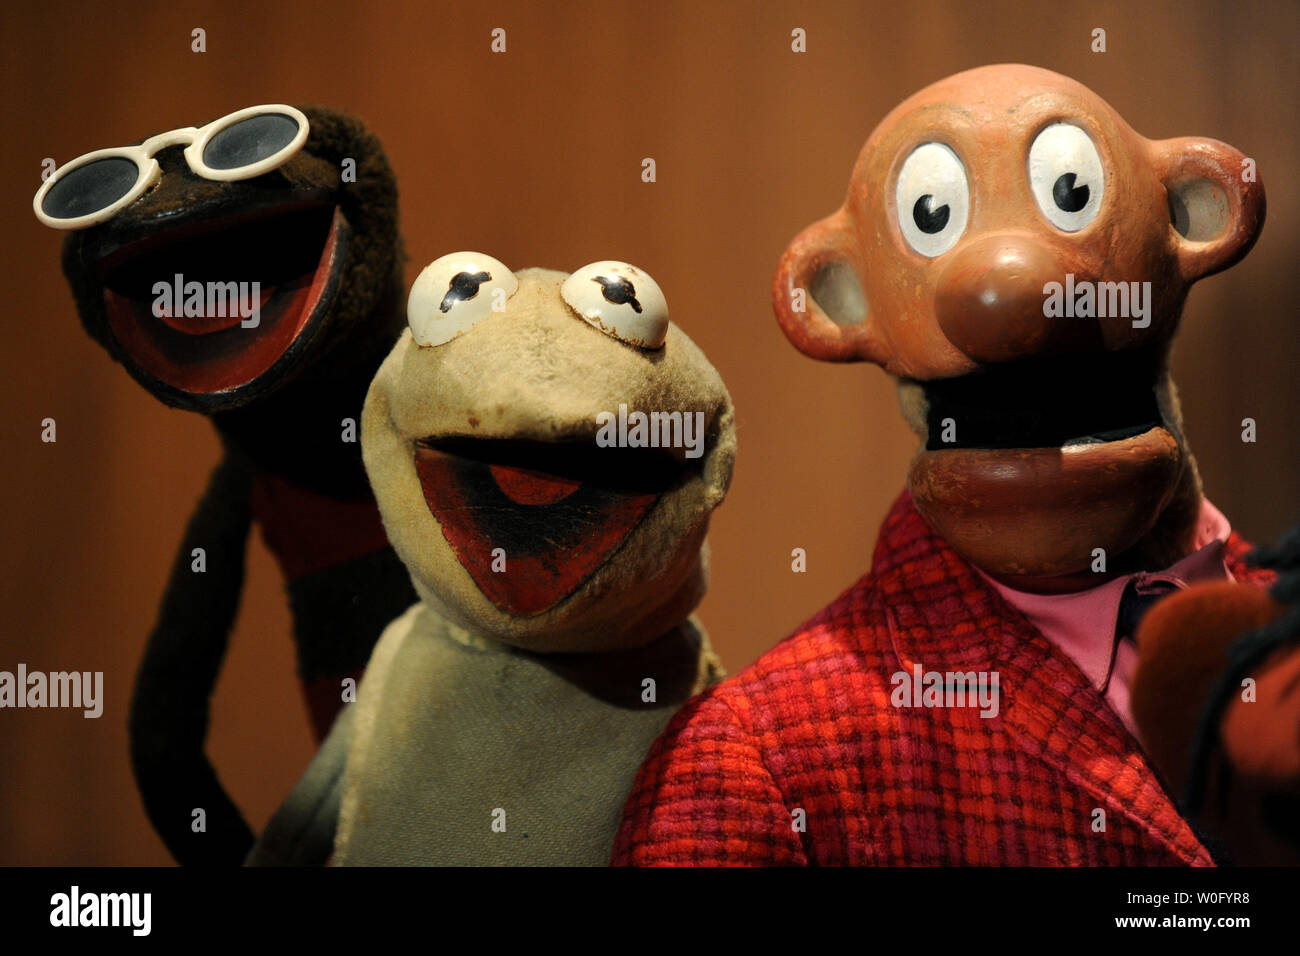 Puppets from Jim Henson's television show "Sam and Friends," including the original Kermit (C), are seen on display during a donation ceremony at the Smithsonian's National Museum of American History in Washington on August 25, 2010. The Jim Henson Legacy donated the puppets for the Smithsonian's permanent entertainment collection.    UPI/Kevin Dietsch Stock Photo